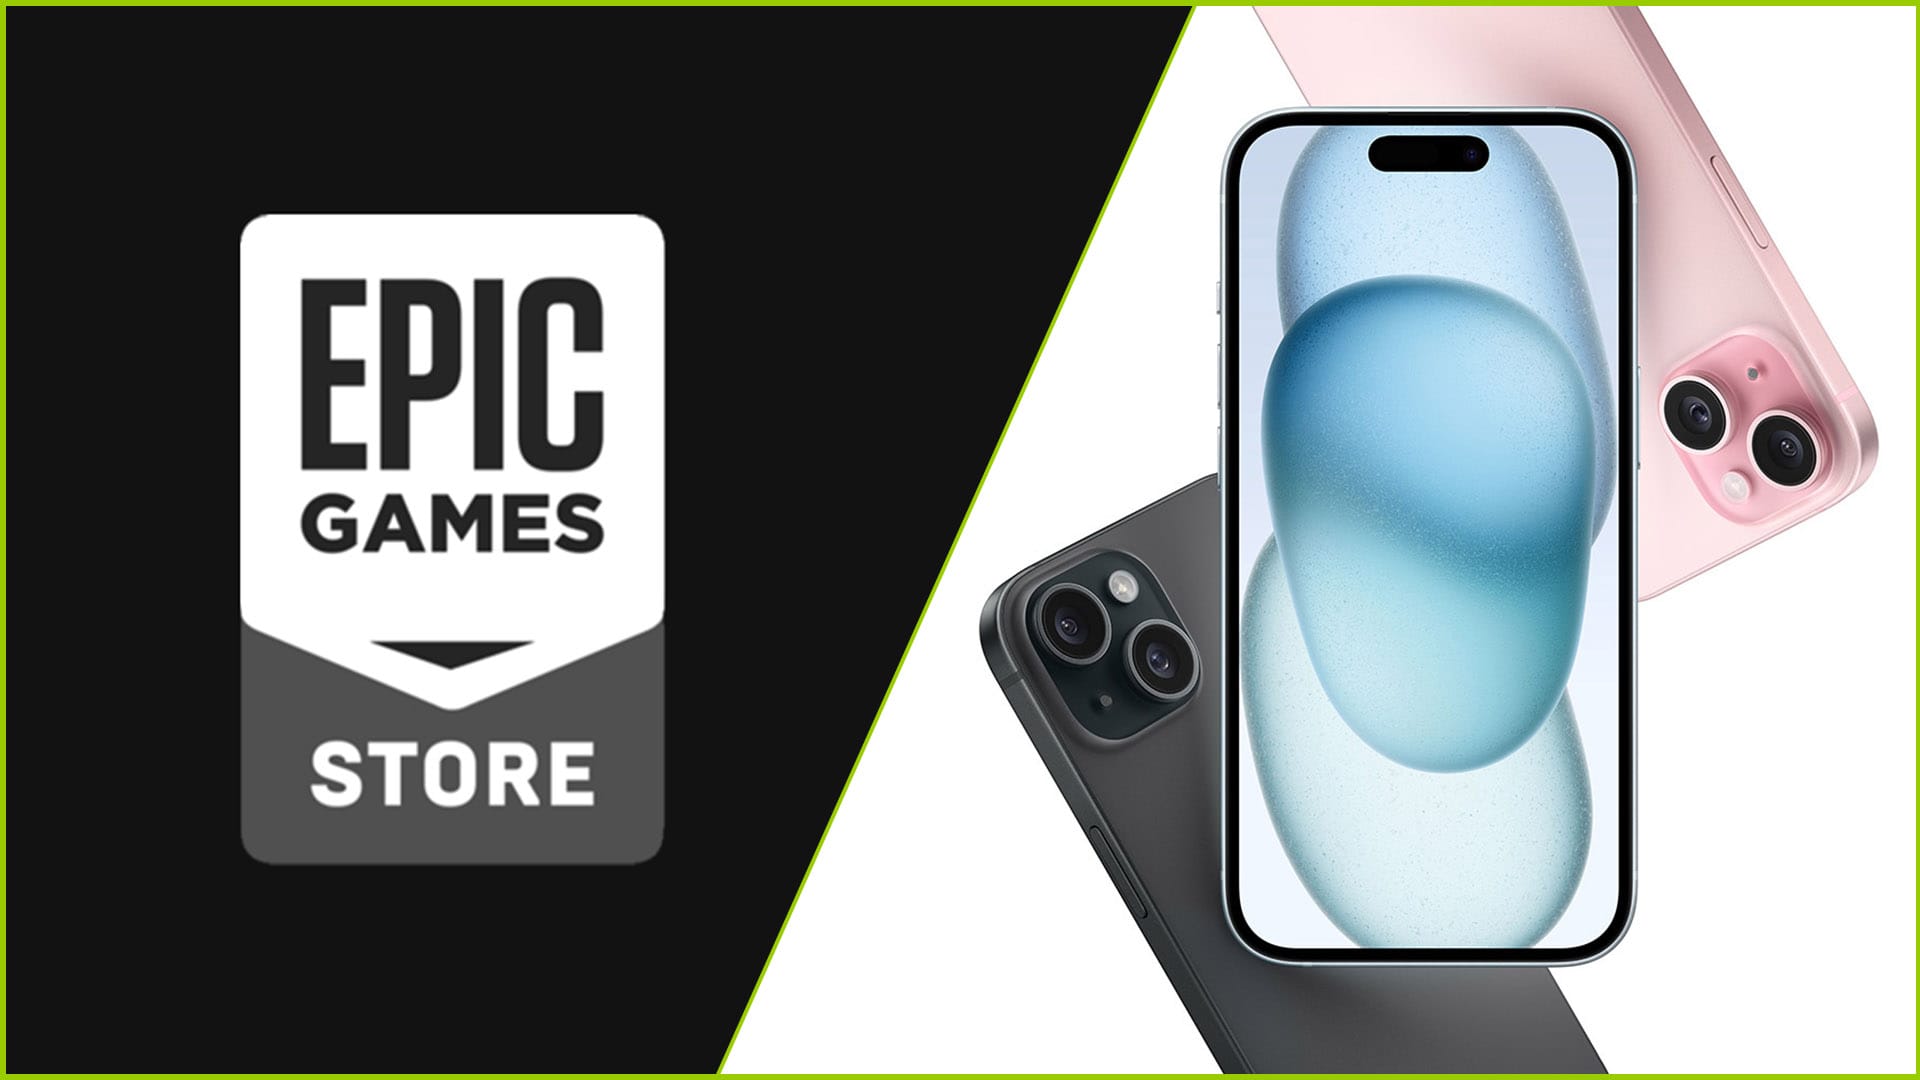 Apple Terminates Epic Games' Developer Account, Takes Issue With Tim Sweeney's Tweets